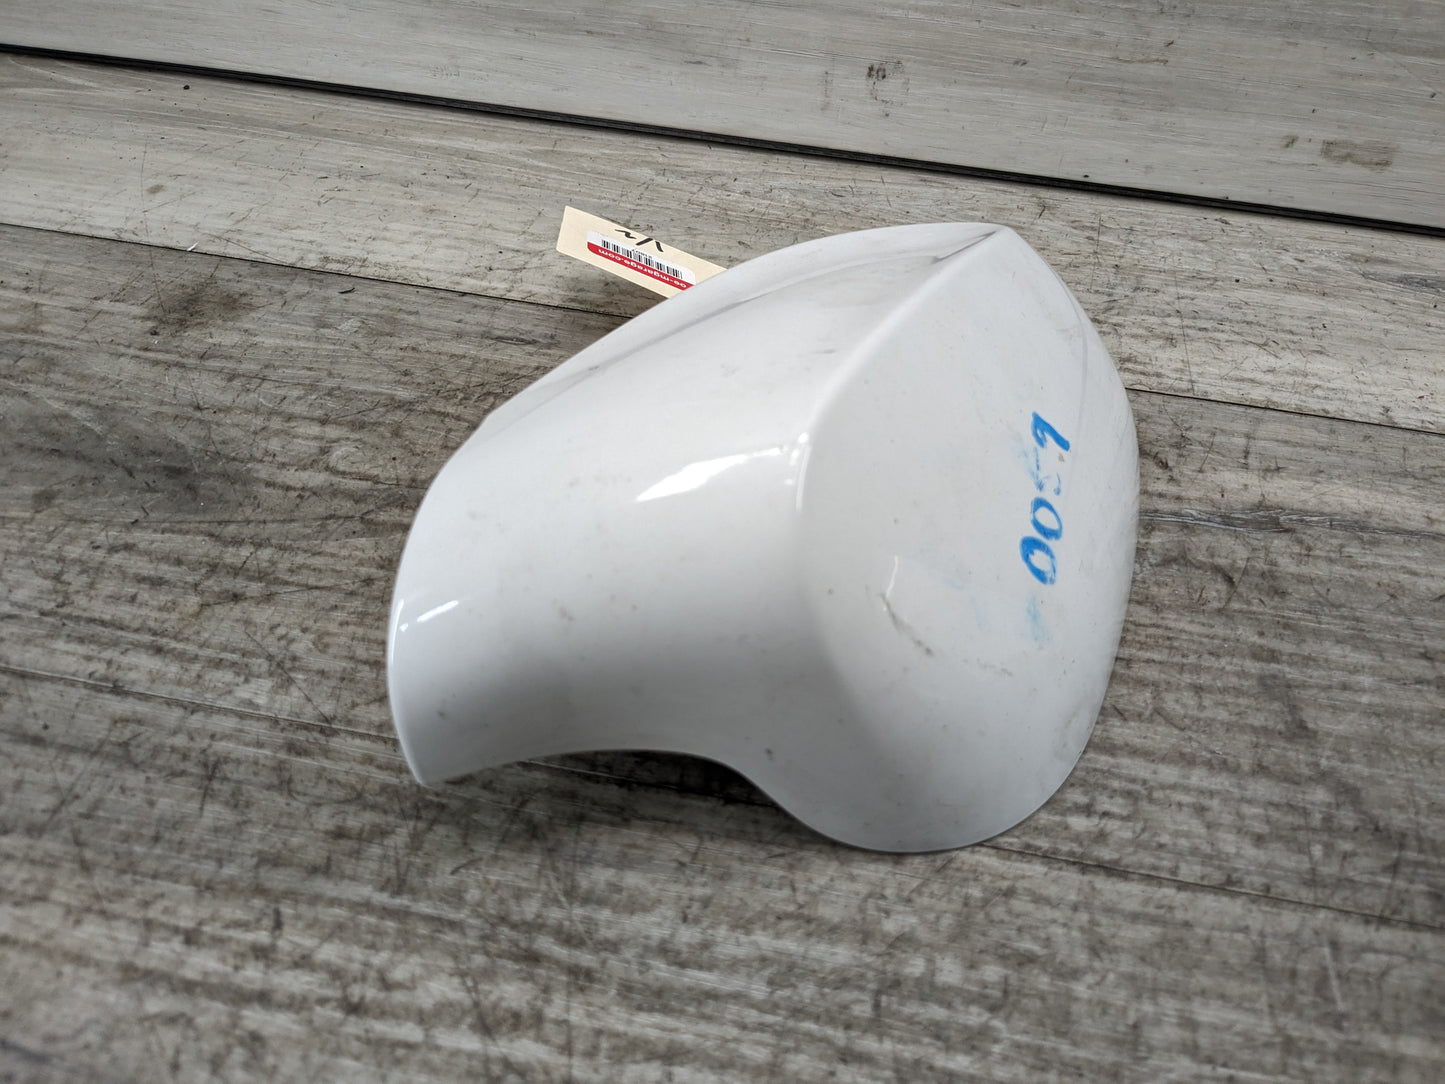 OEM BMW E82 E88 128i 135i Left Right Side View Door Mirror Cover Caps White PAIR